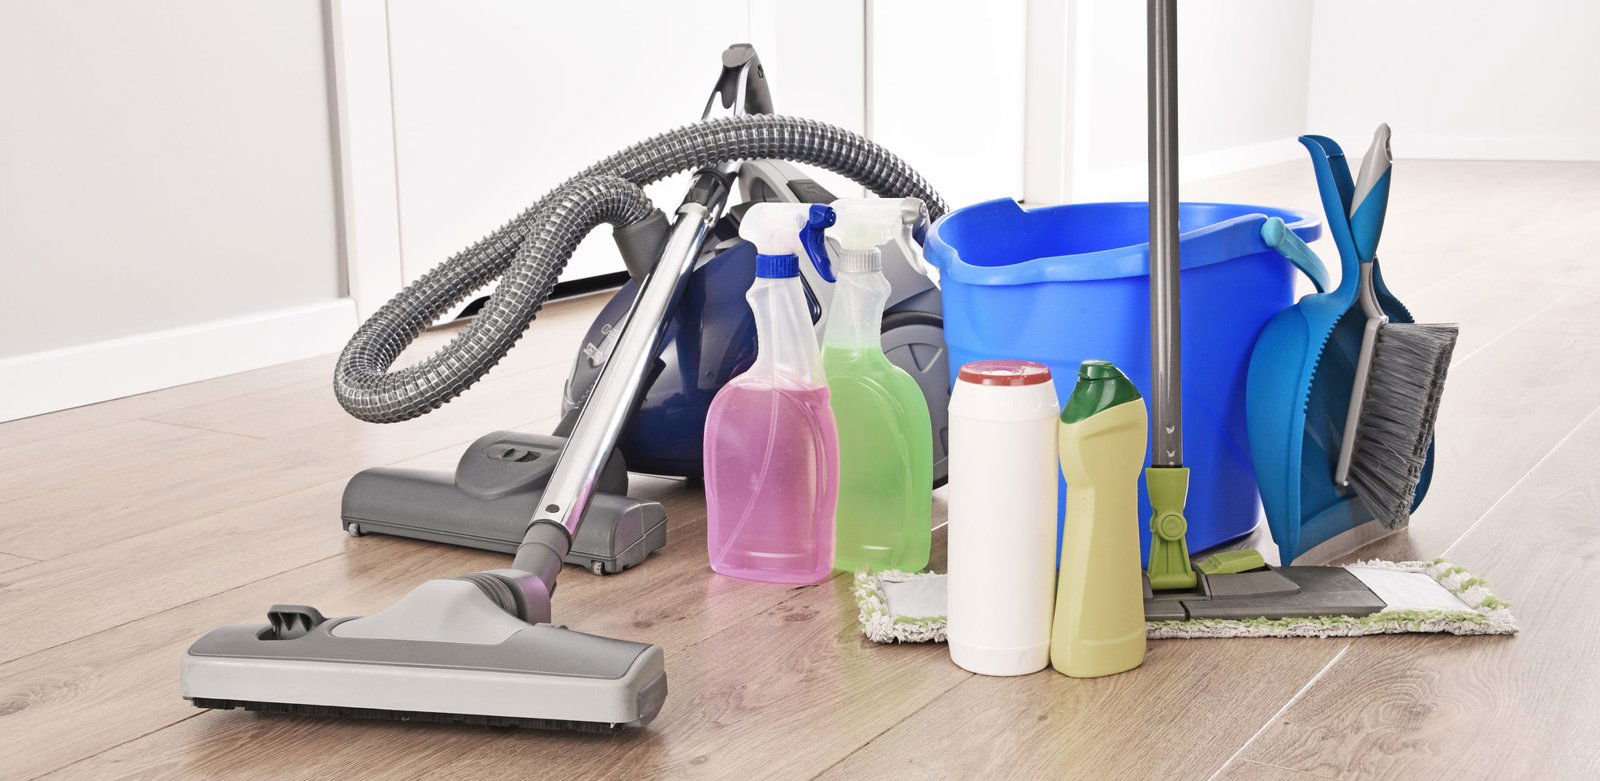 How to Use Cleaning Equipment Properly in Dubai